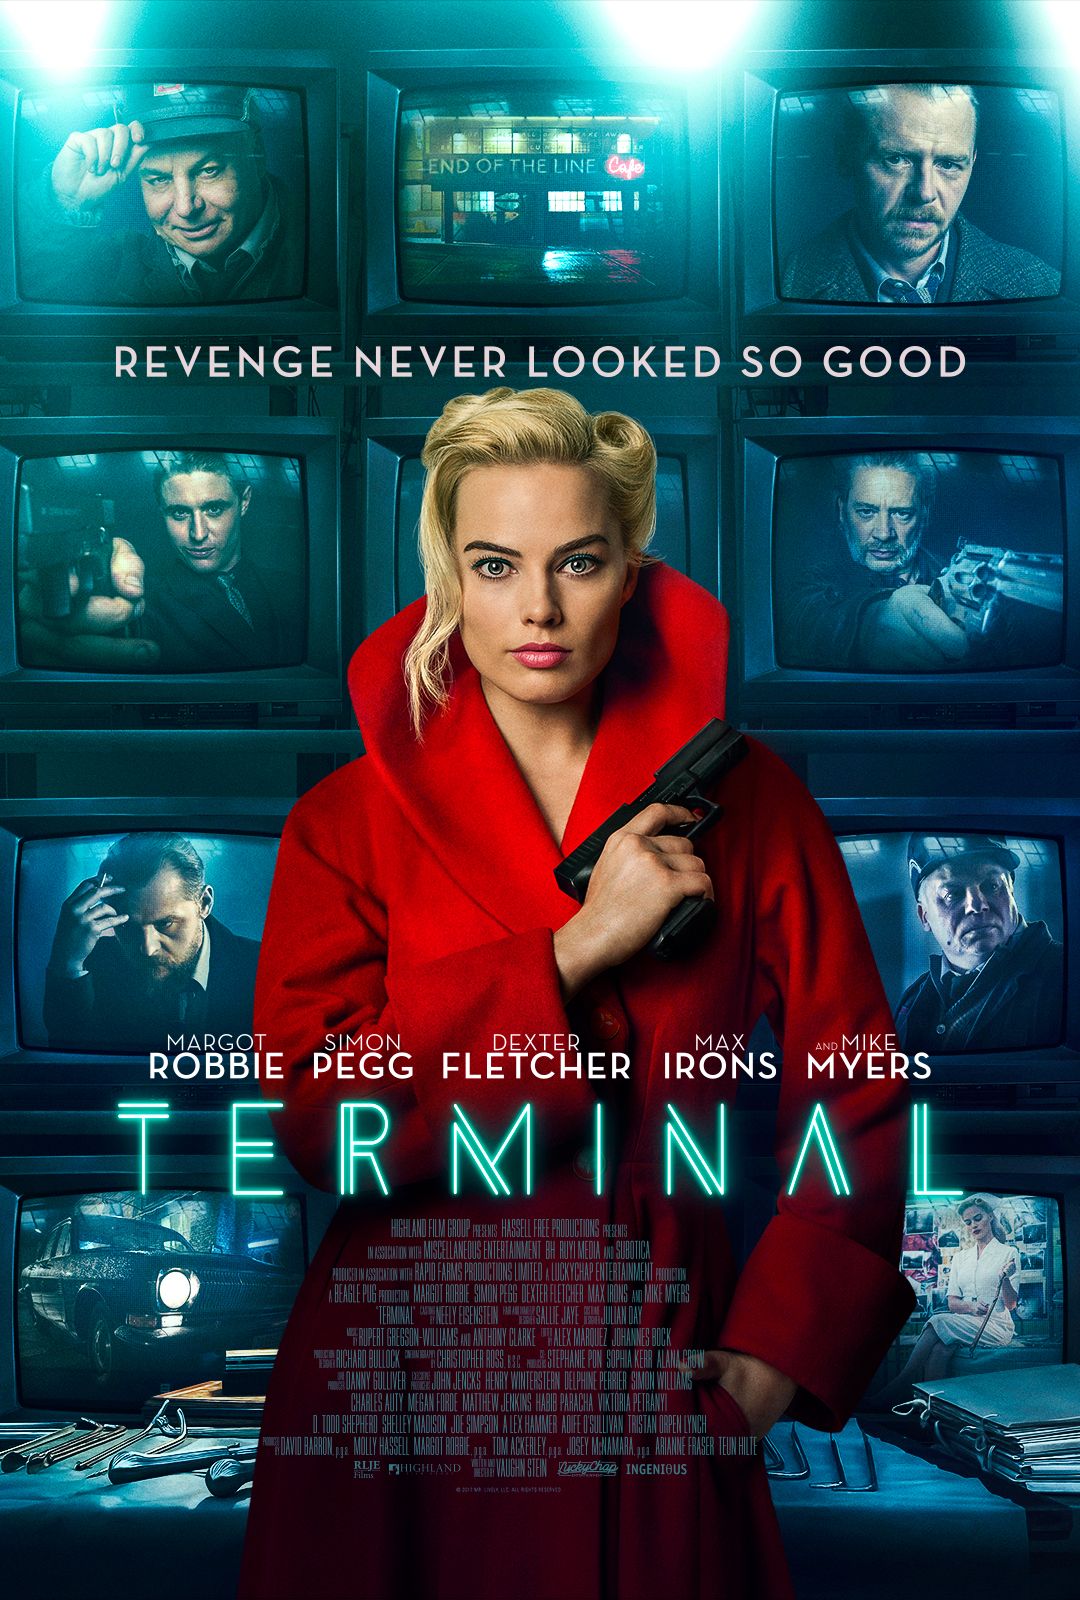 Margot Robbie Is a Femme Fatale in the First Terminal Posters | Collider